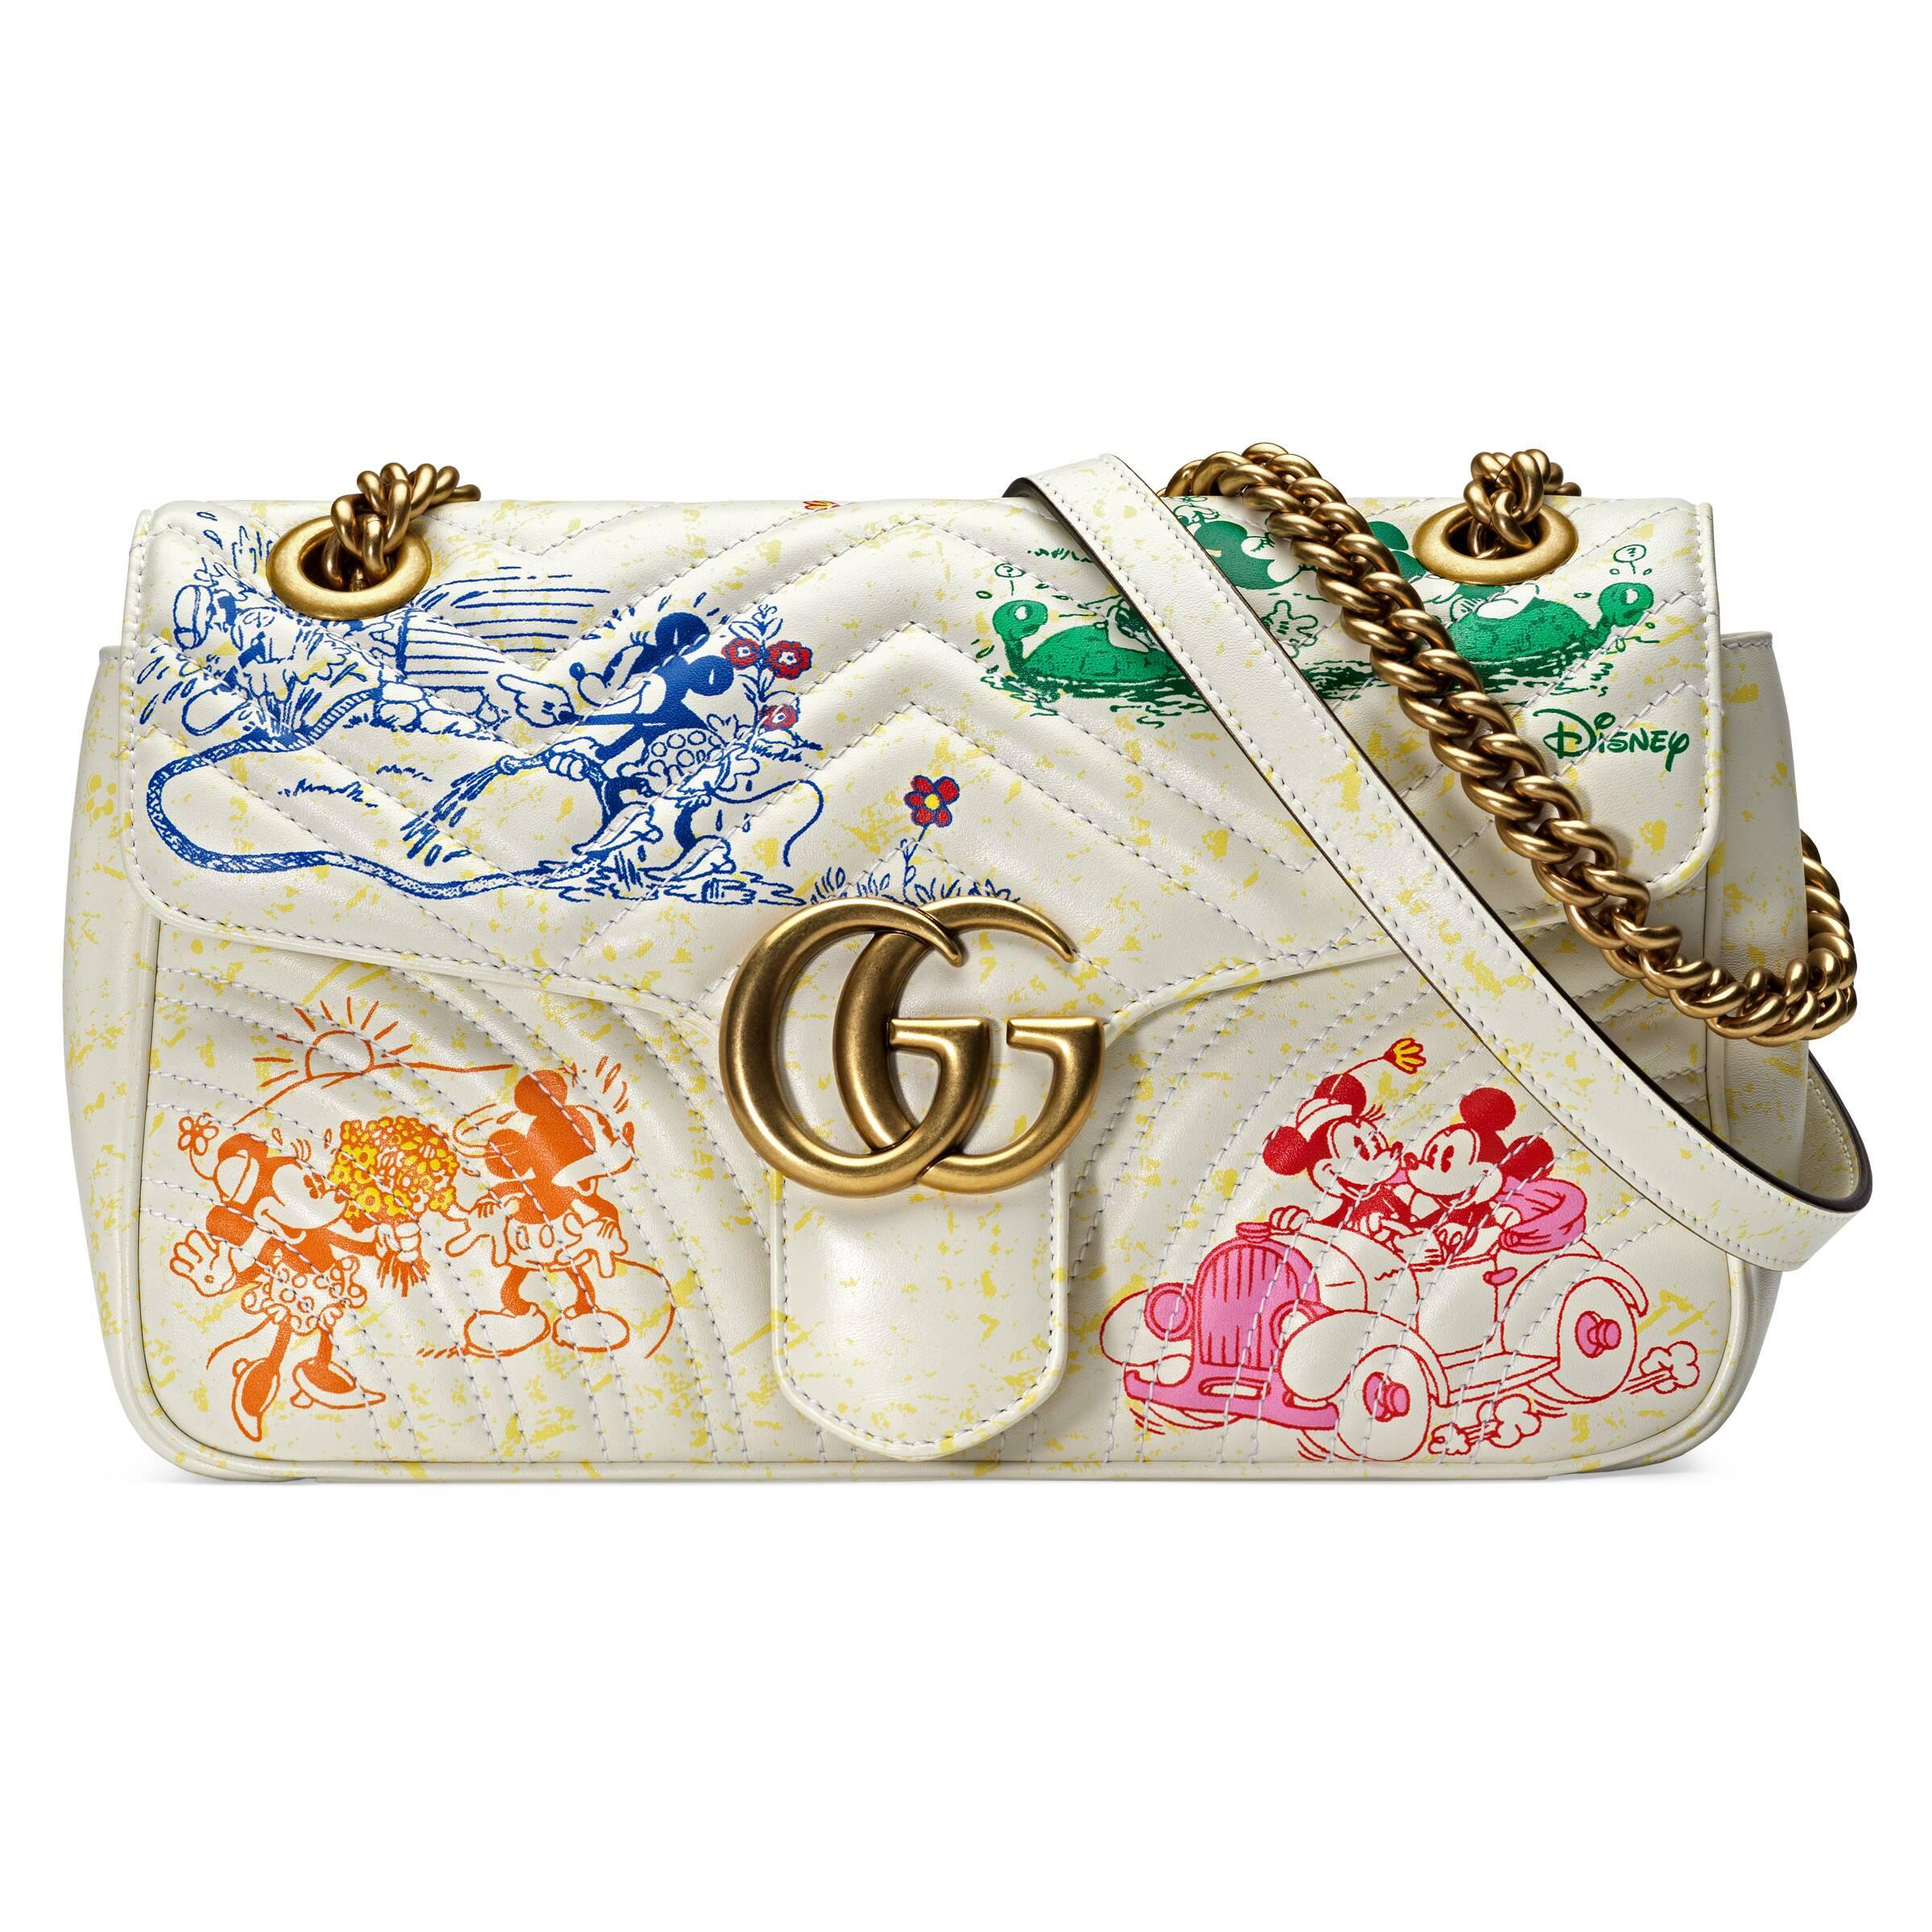 Gucci Online Exclusive Disney X GG Marmont Small Shoulder Bag in White